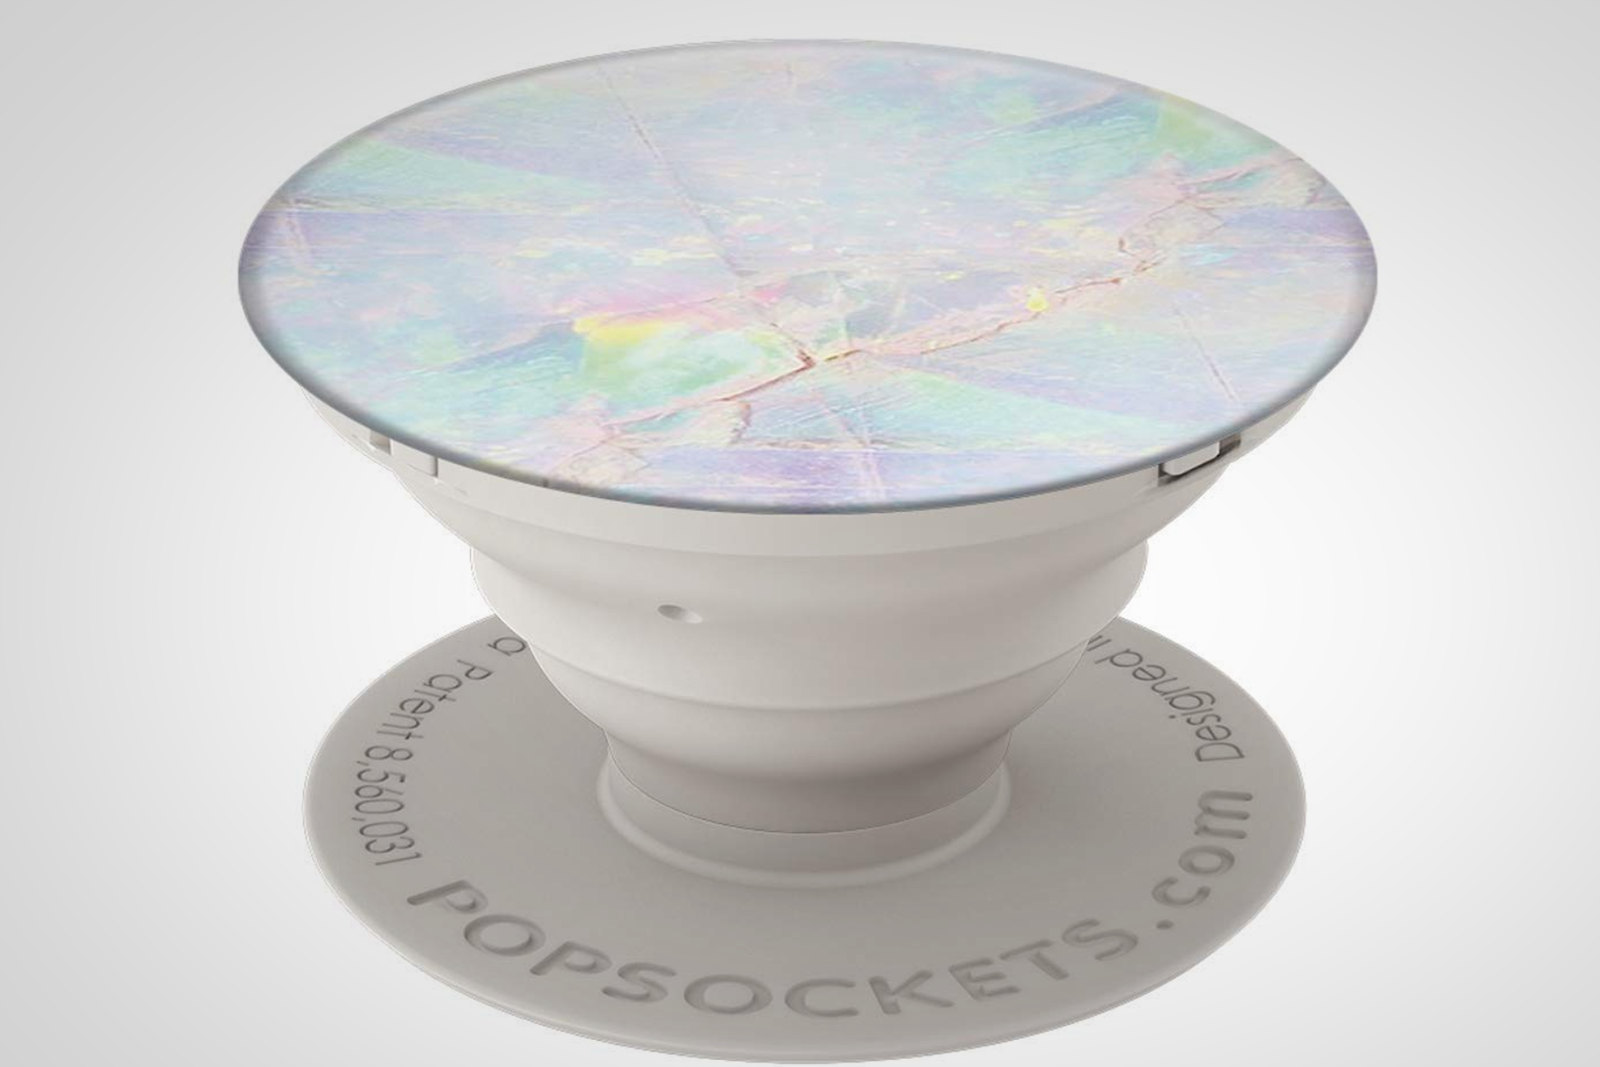 Best PopSocket designs 2020 Get a grip on your device with these cool patterns image 3